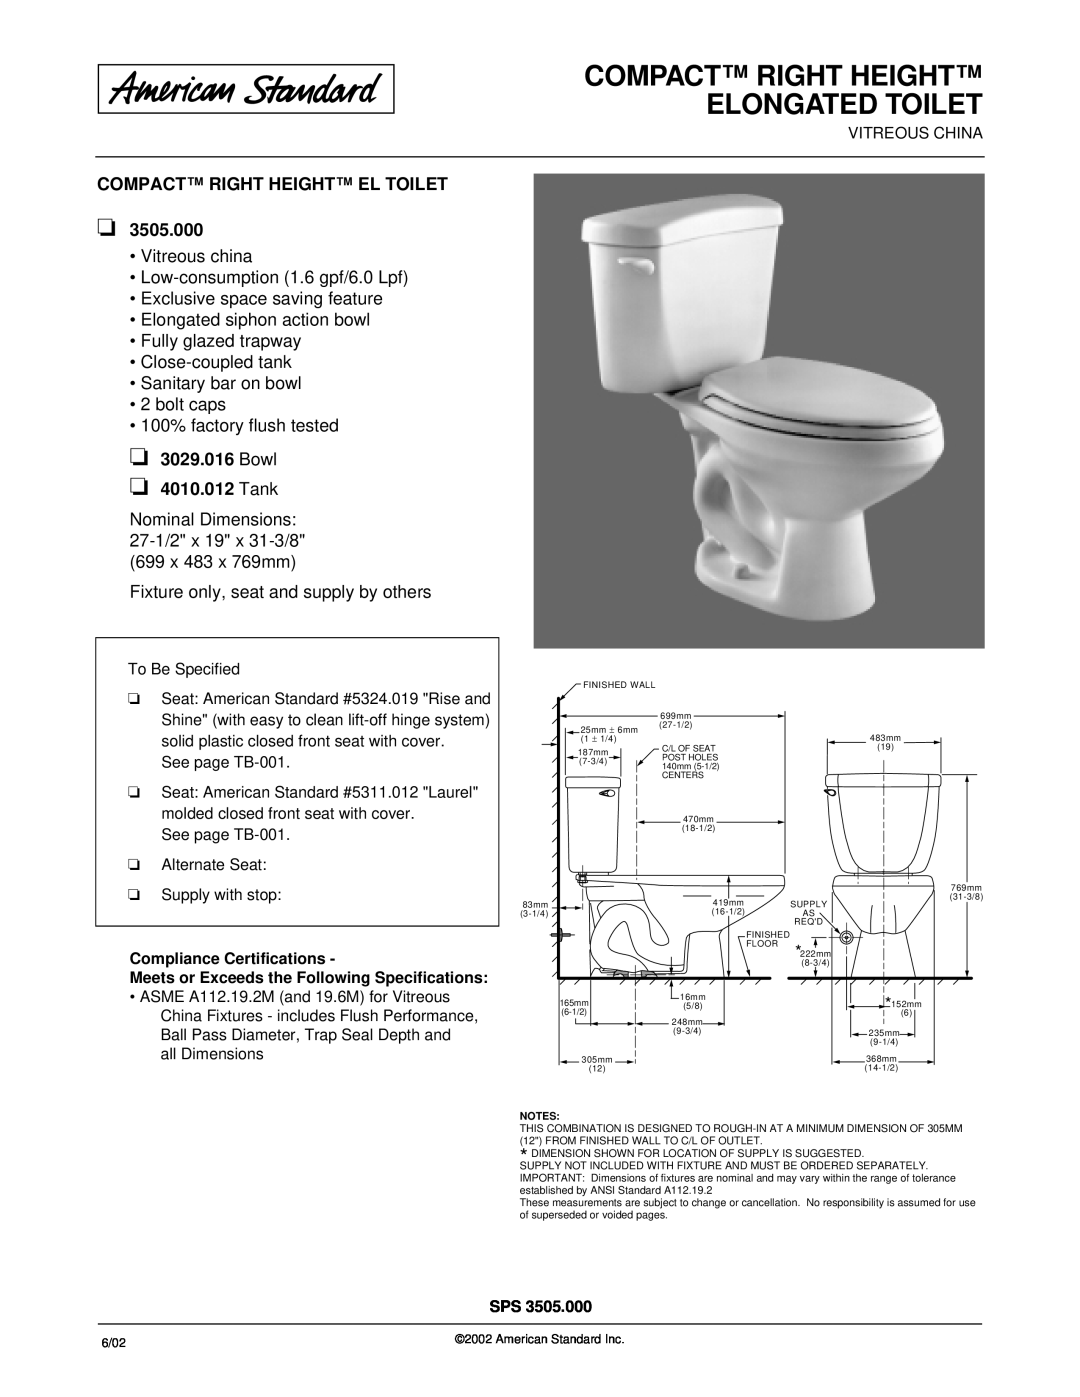 American Standard 3505.000 dimensions Compact Right Height Elongated Toilet, Compact Right Height El Toilet, 6/02 